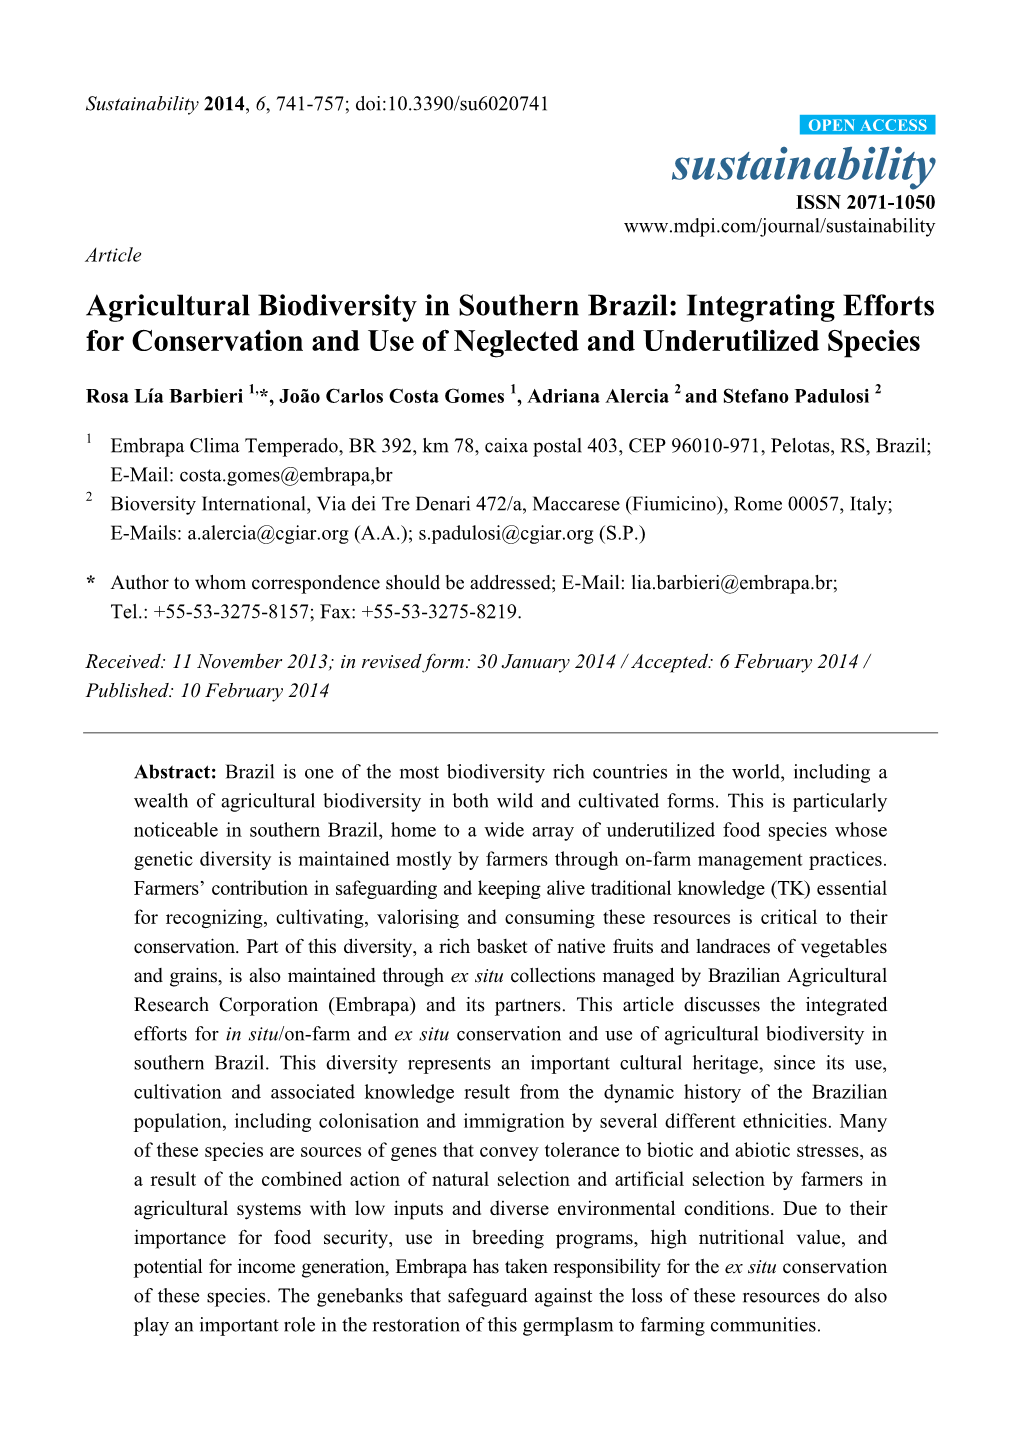 Agricultural Biodiversity in Southern Brazil: Integrating Efforts for Conservation and Use of Neglected and Underutilized Species